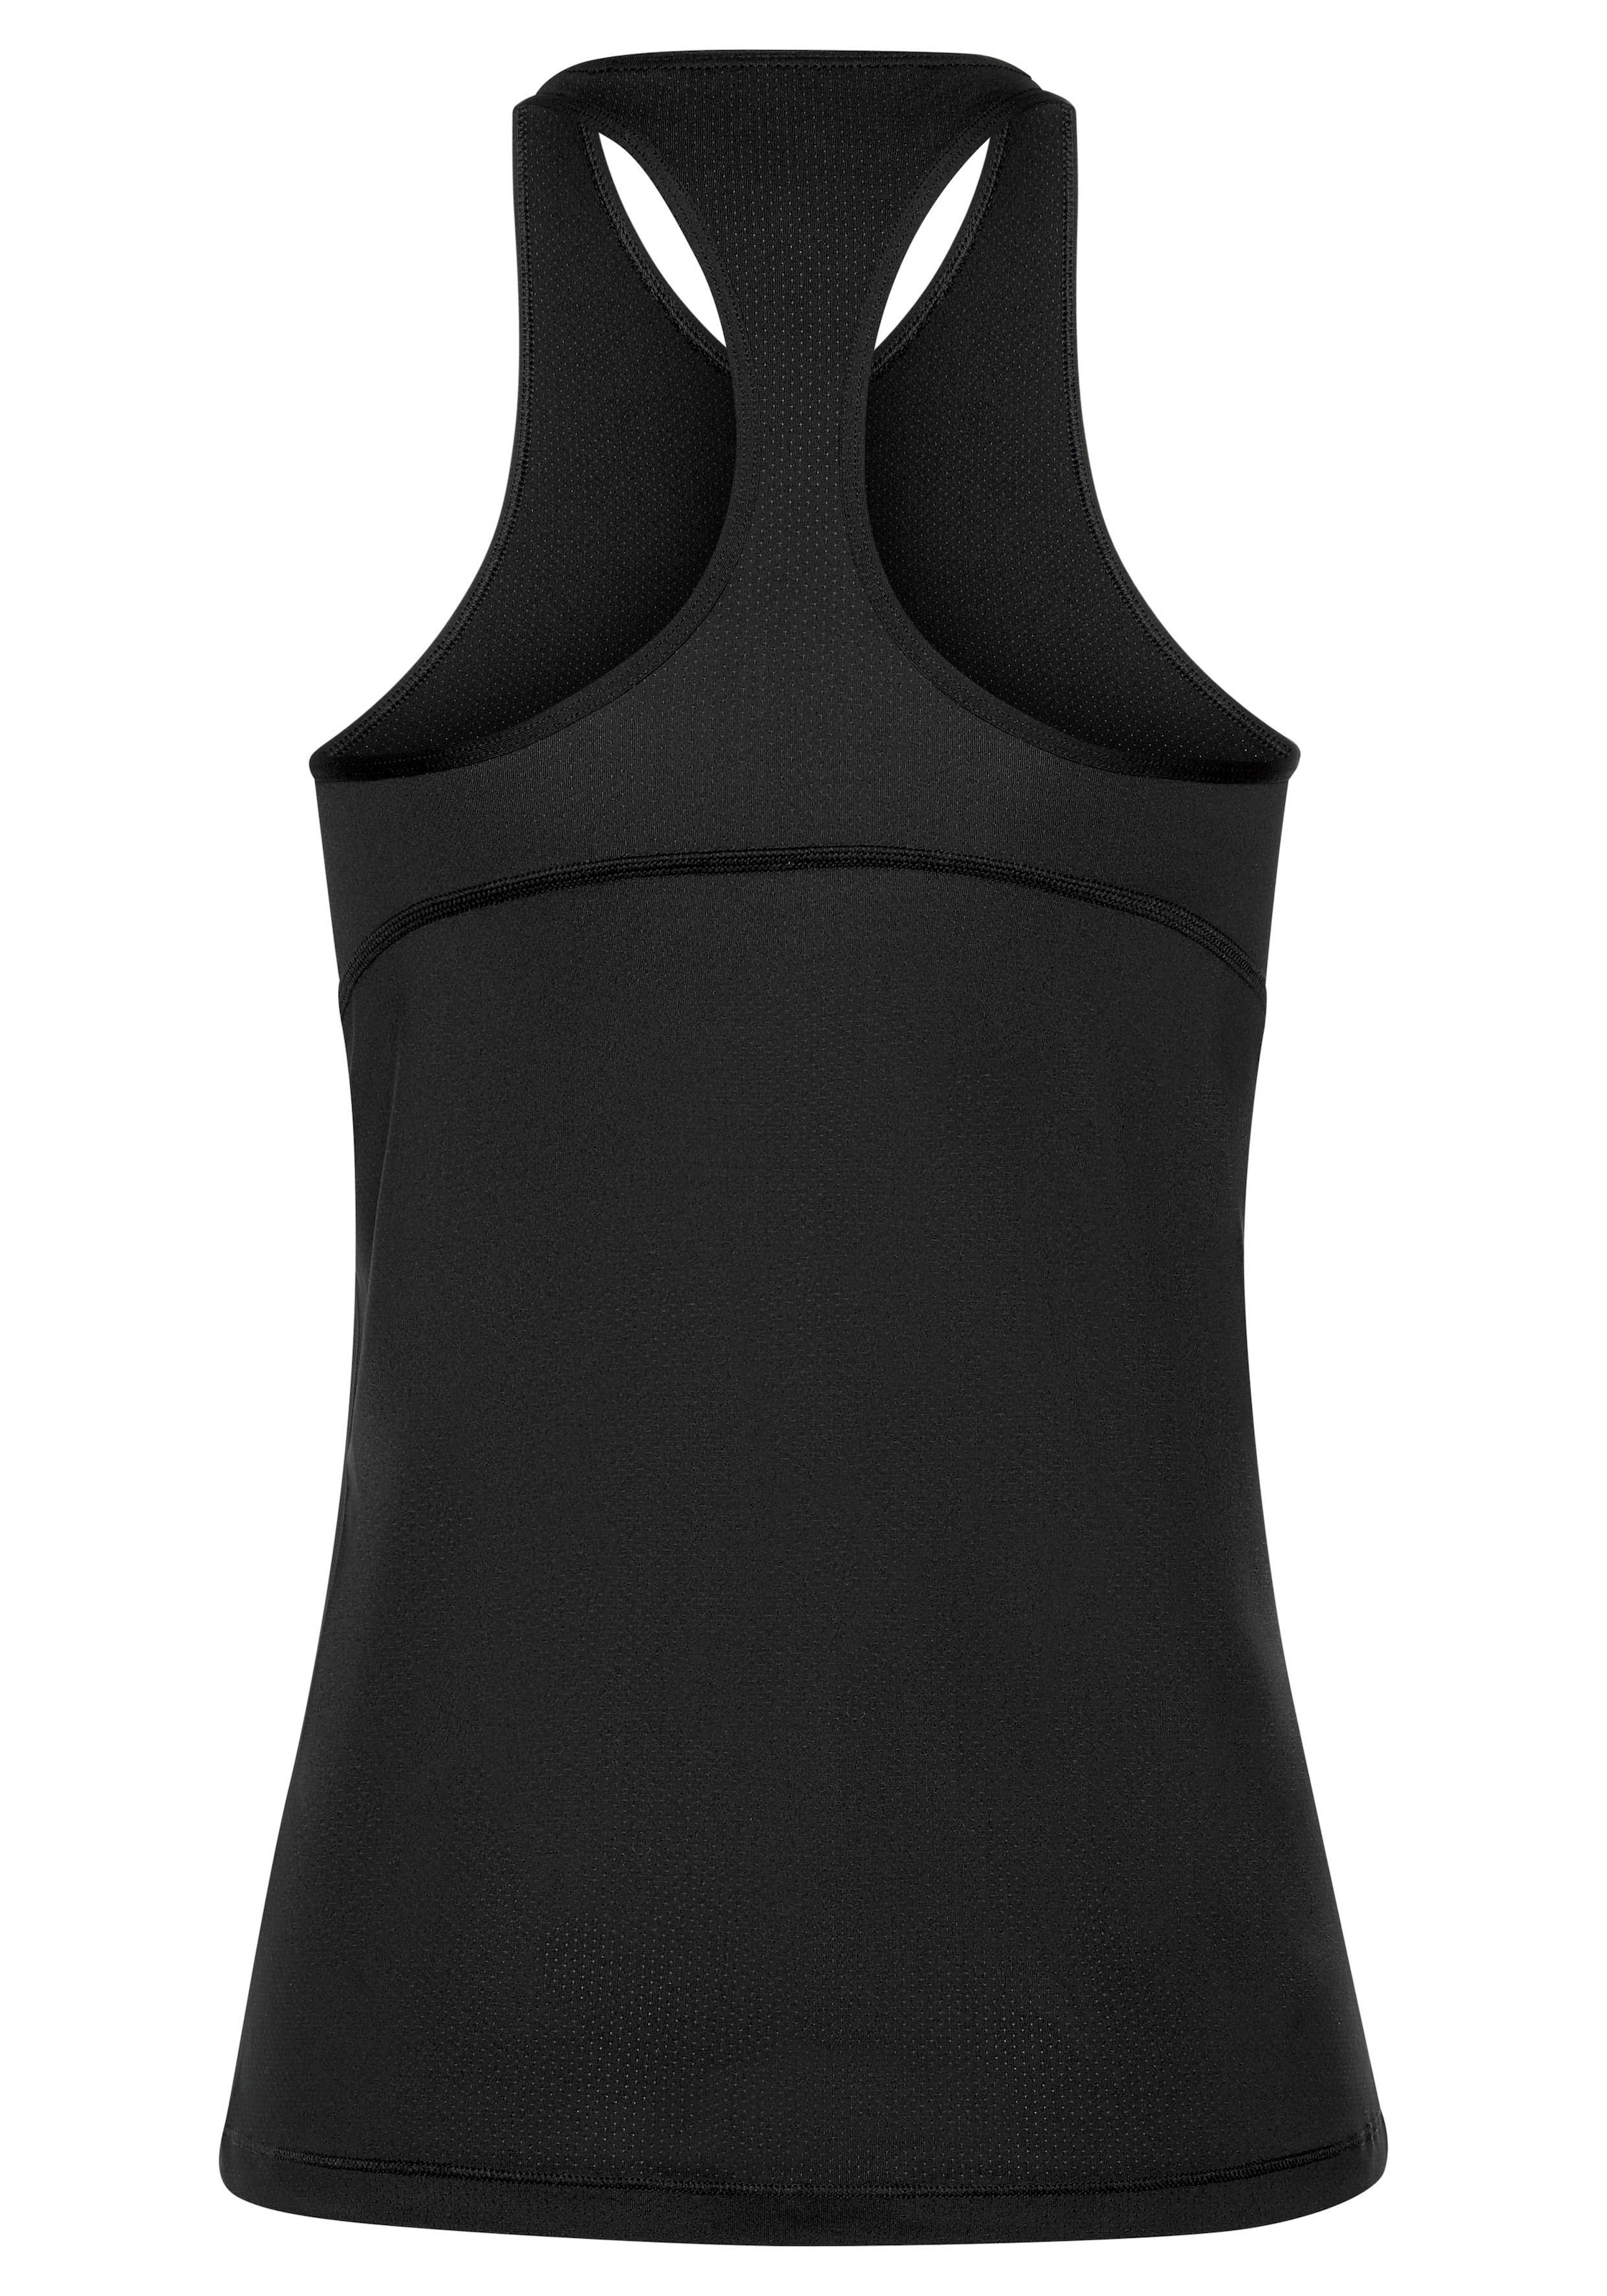 TANK OVER NP ALL Funktionstop MESH« Nike online »WOMAN